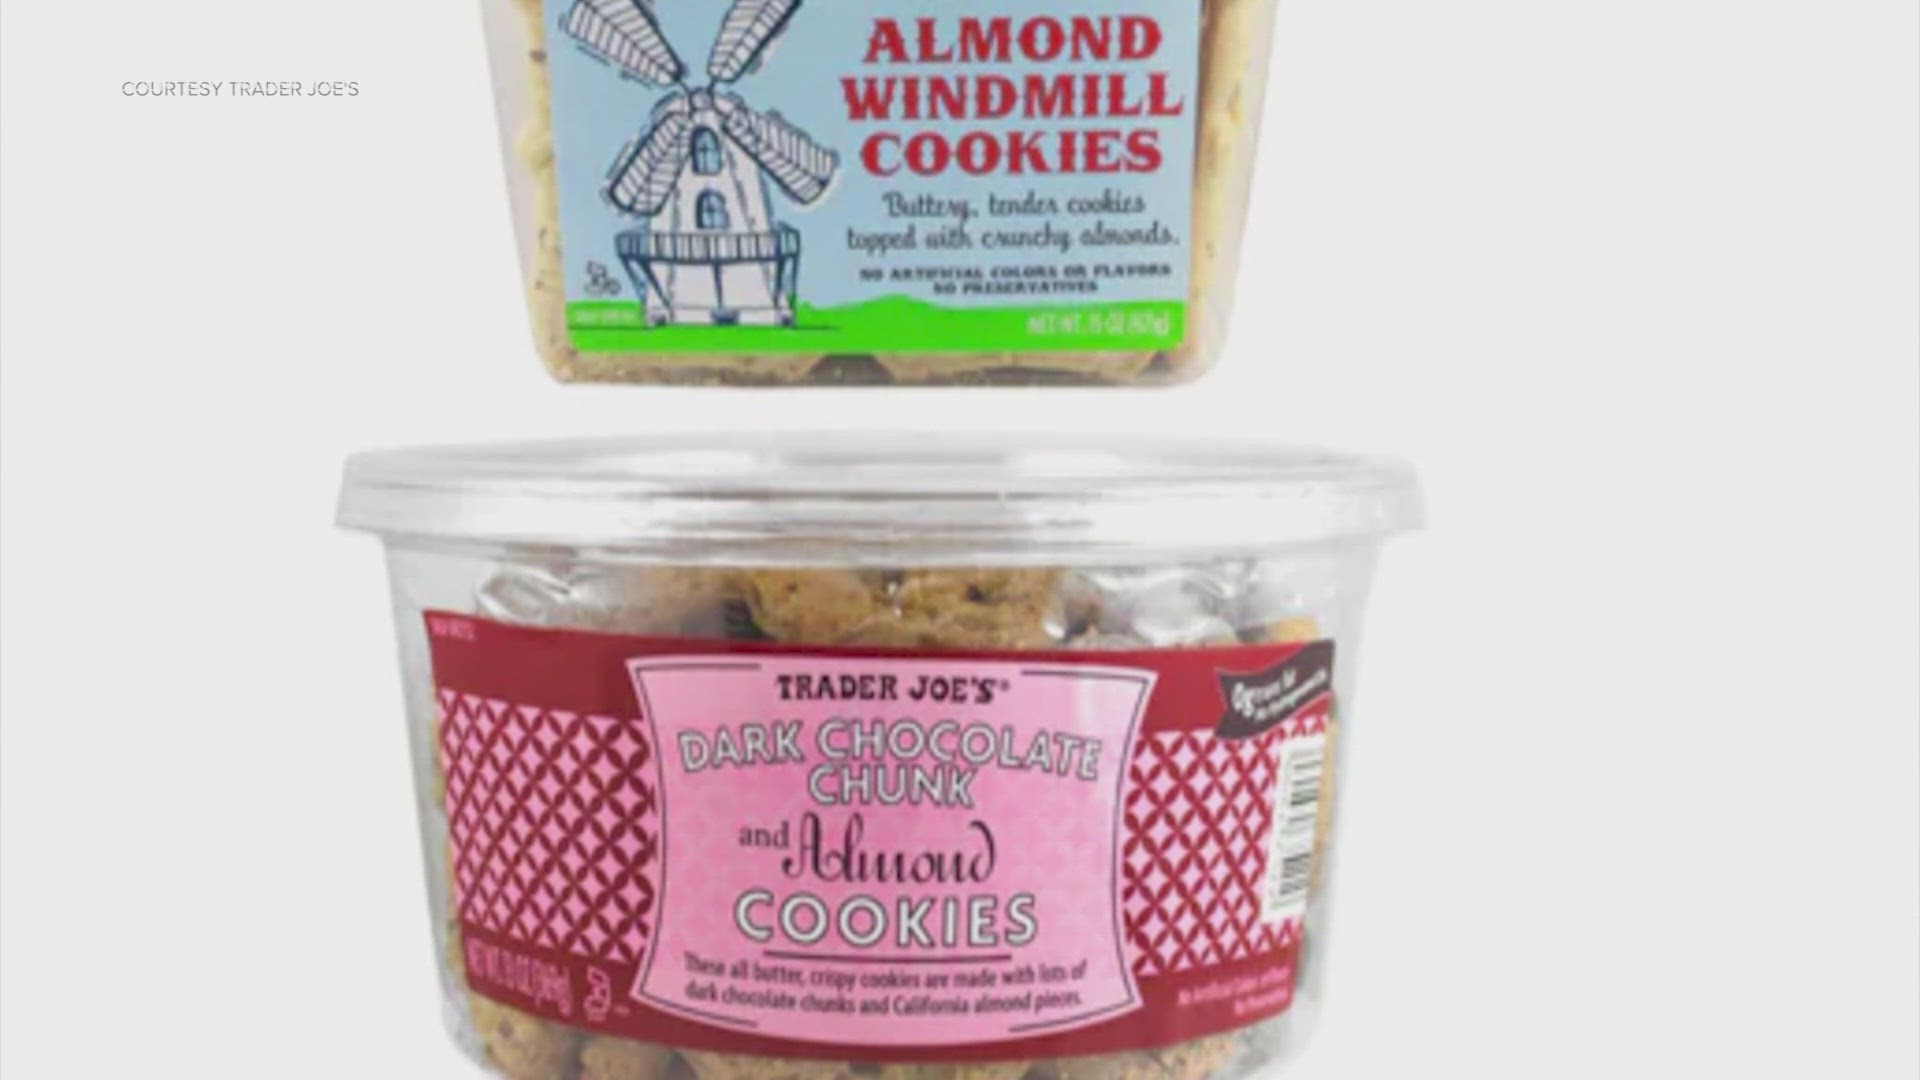 Check your pantry! Trader Joe's urges customers to throw the cookies away or return them for a full refund.